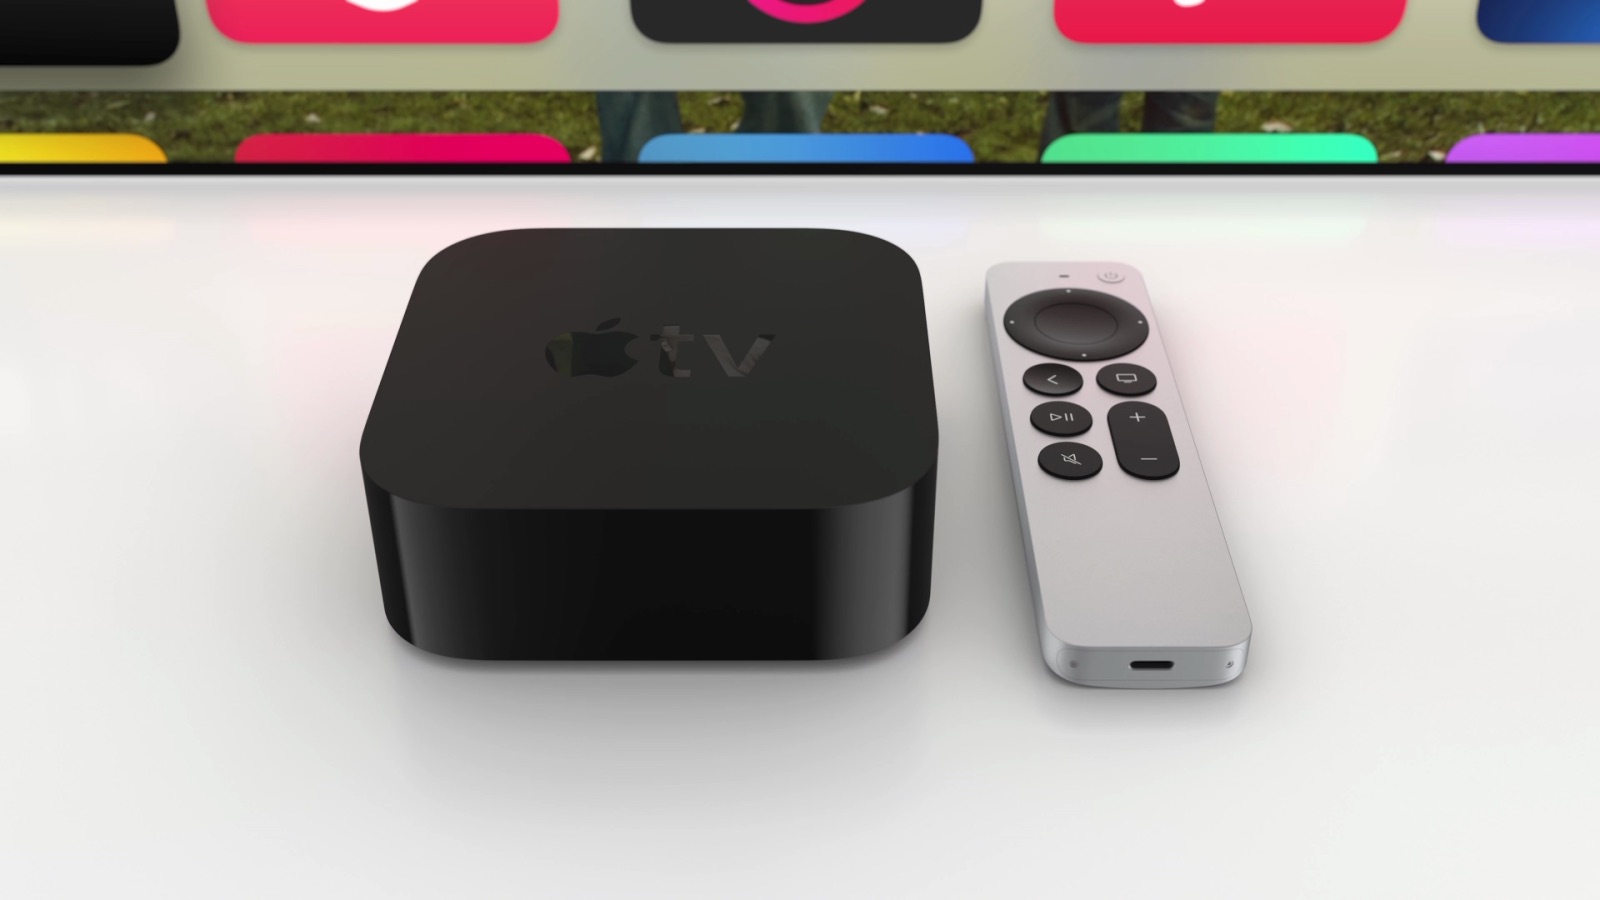 Apple TV will get a competitor with Microsoft's new Xbox streaming device.